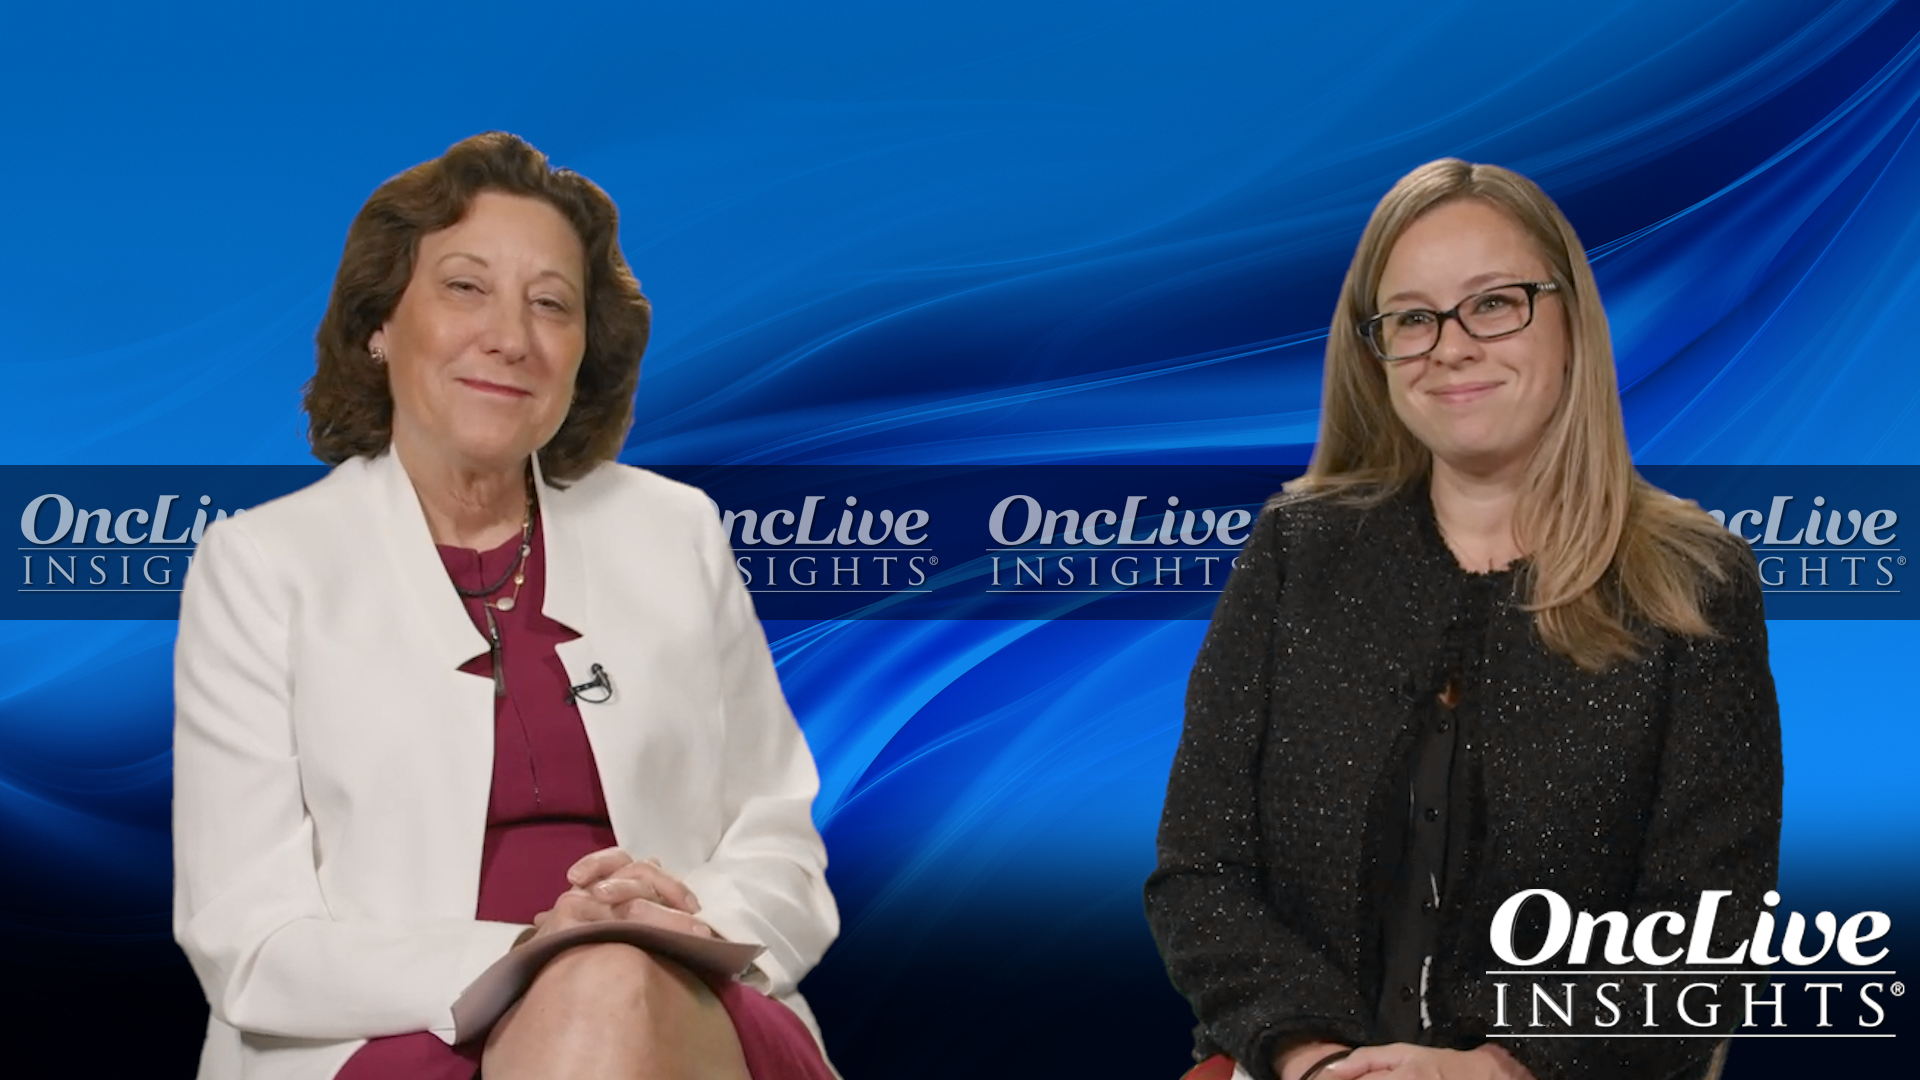 Video 4 - "The Evolving Treatment Landscape with CDK4/6 Inhibitors in Early HR+/HER2- Breast Cancer"